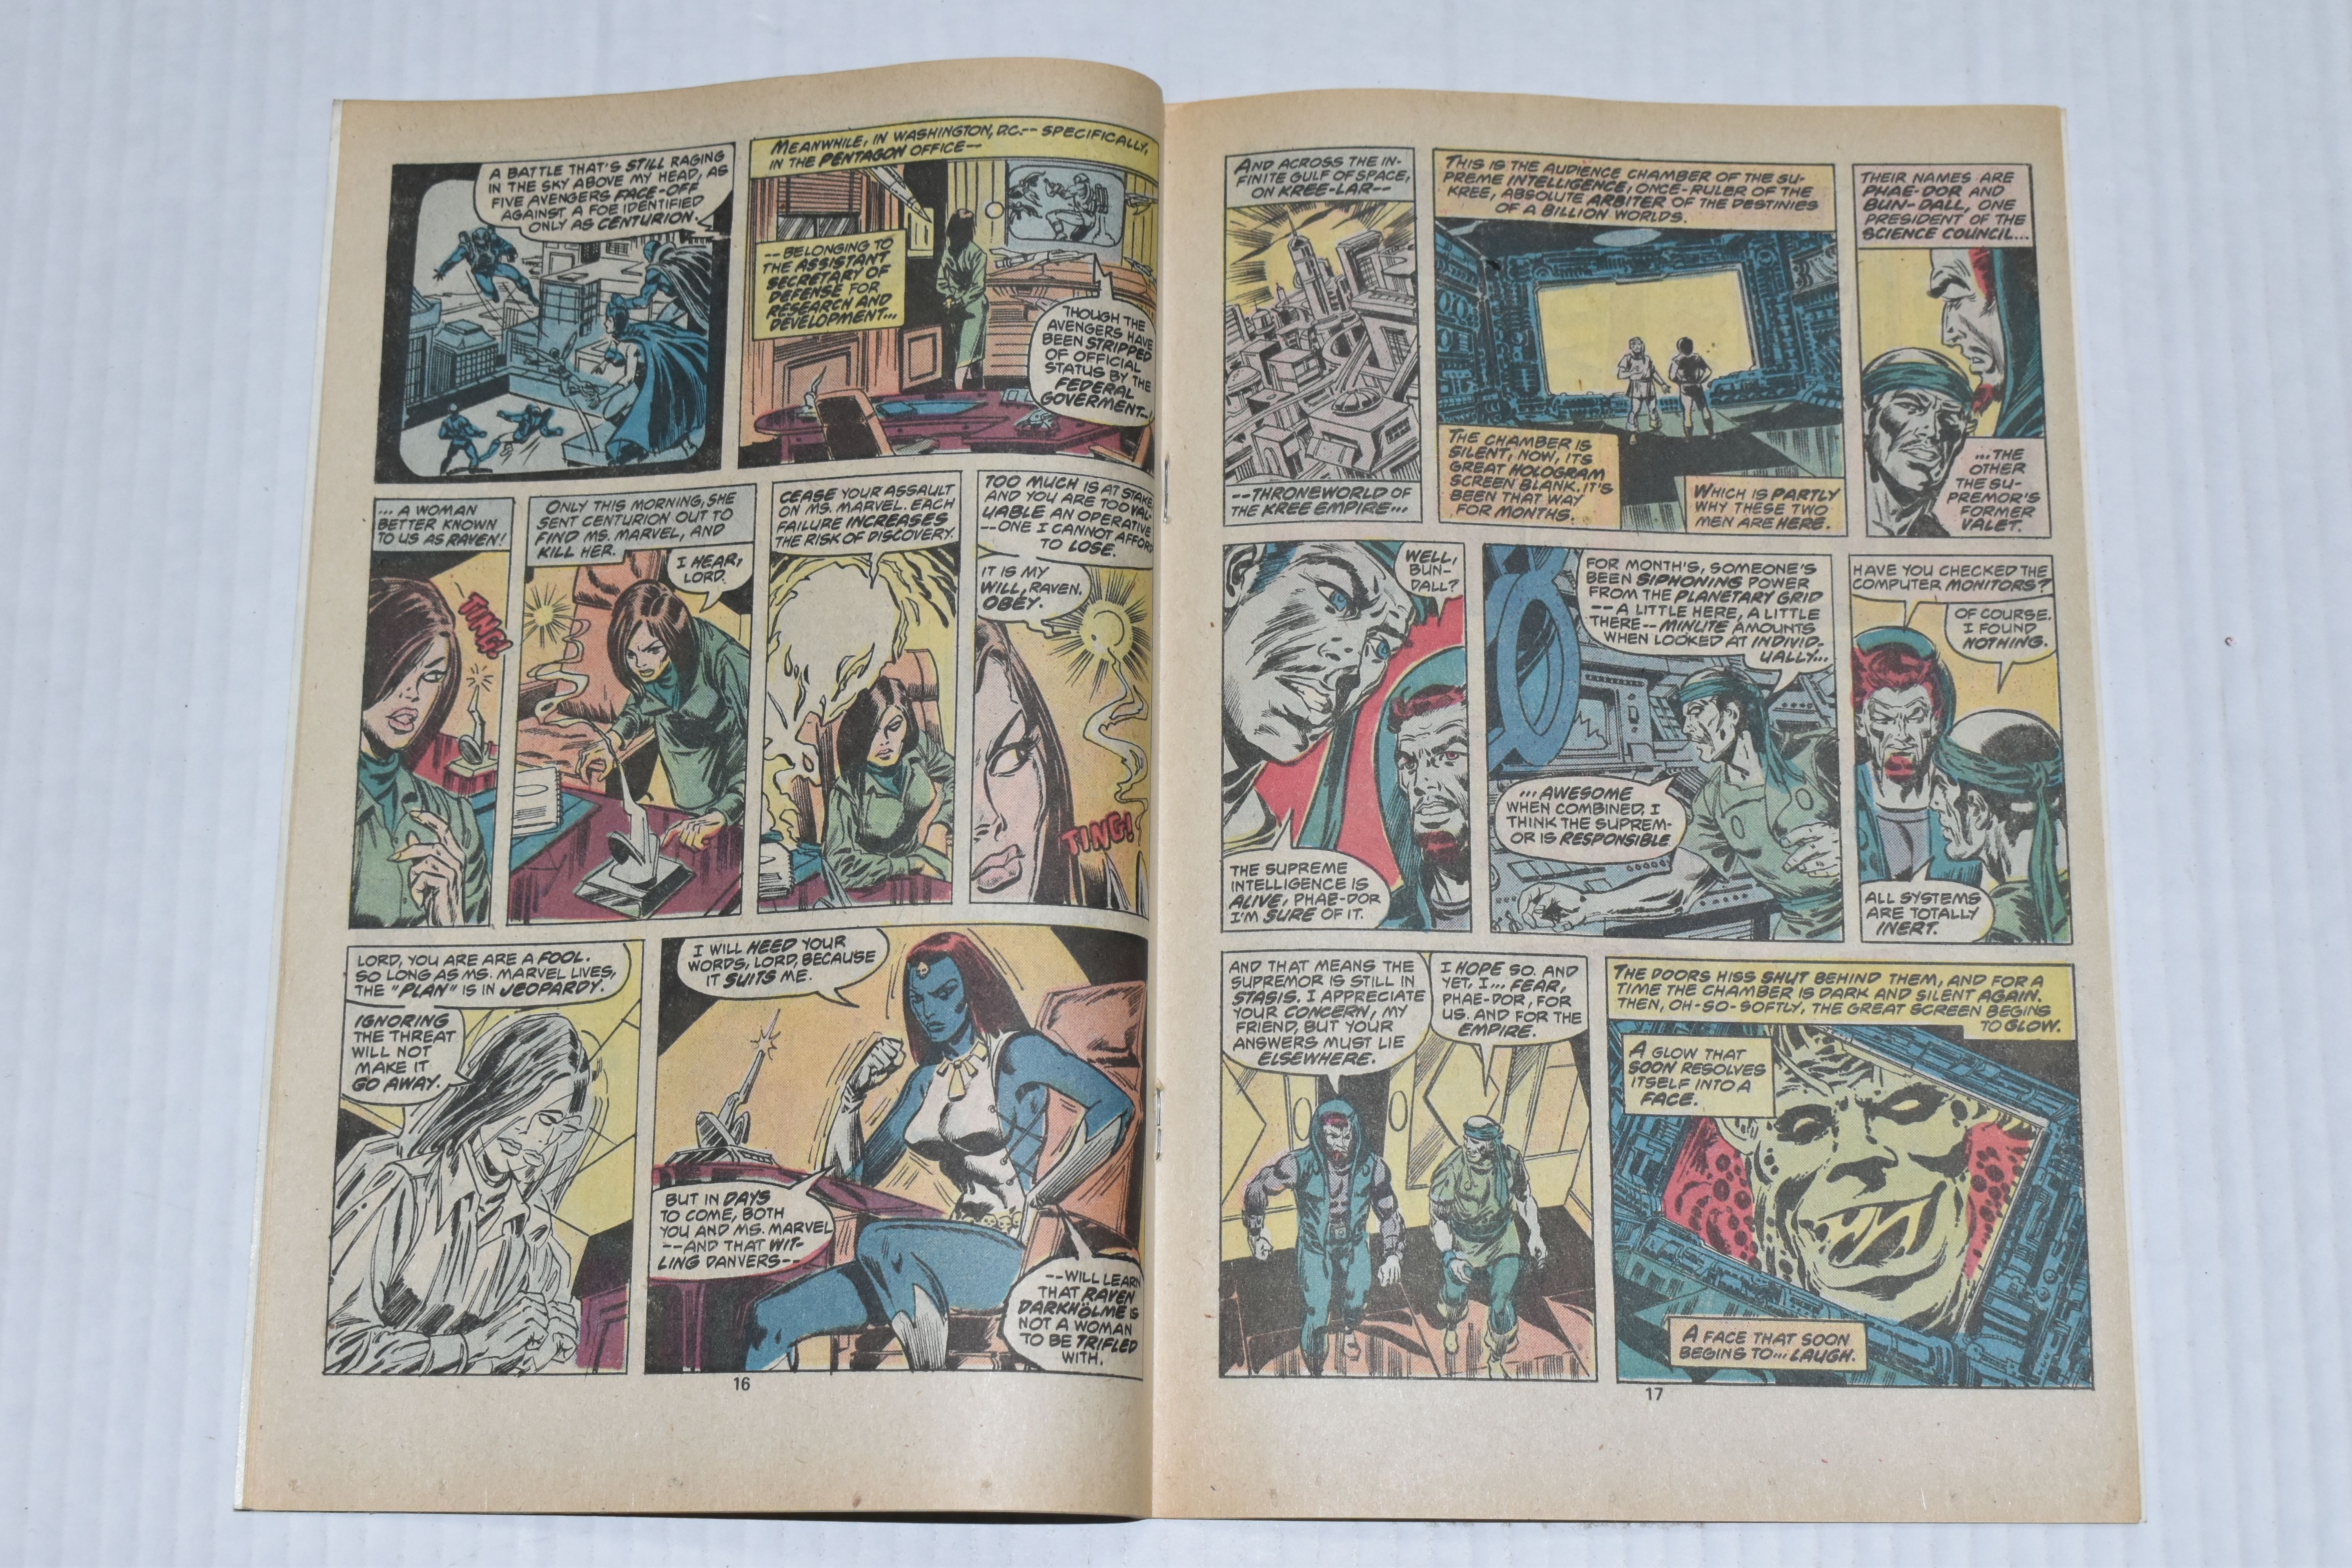 MS. MARVEL NOS. 16 & 18 MARVEL COMICS, first appearance of Mystique, comics show signs of wear, - Image 5 of 8